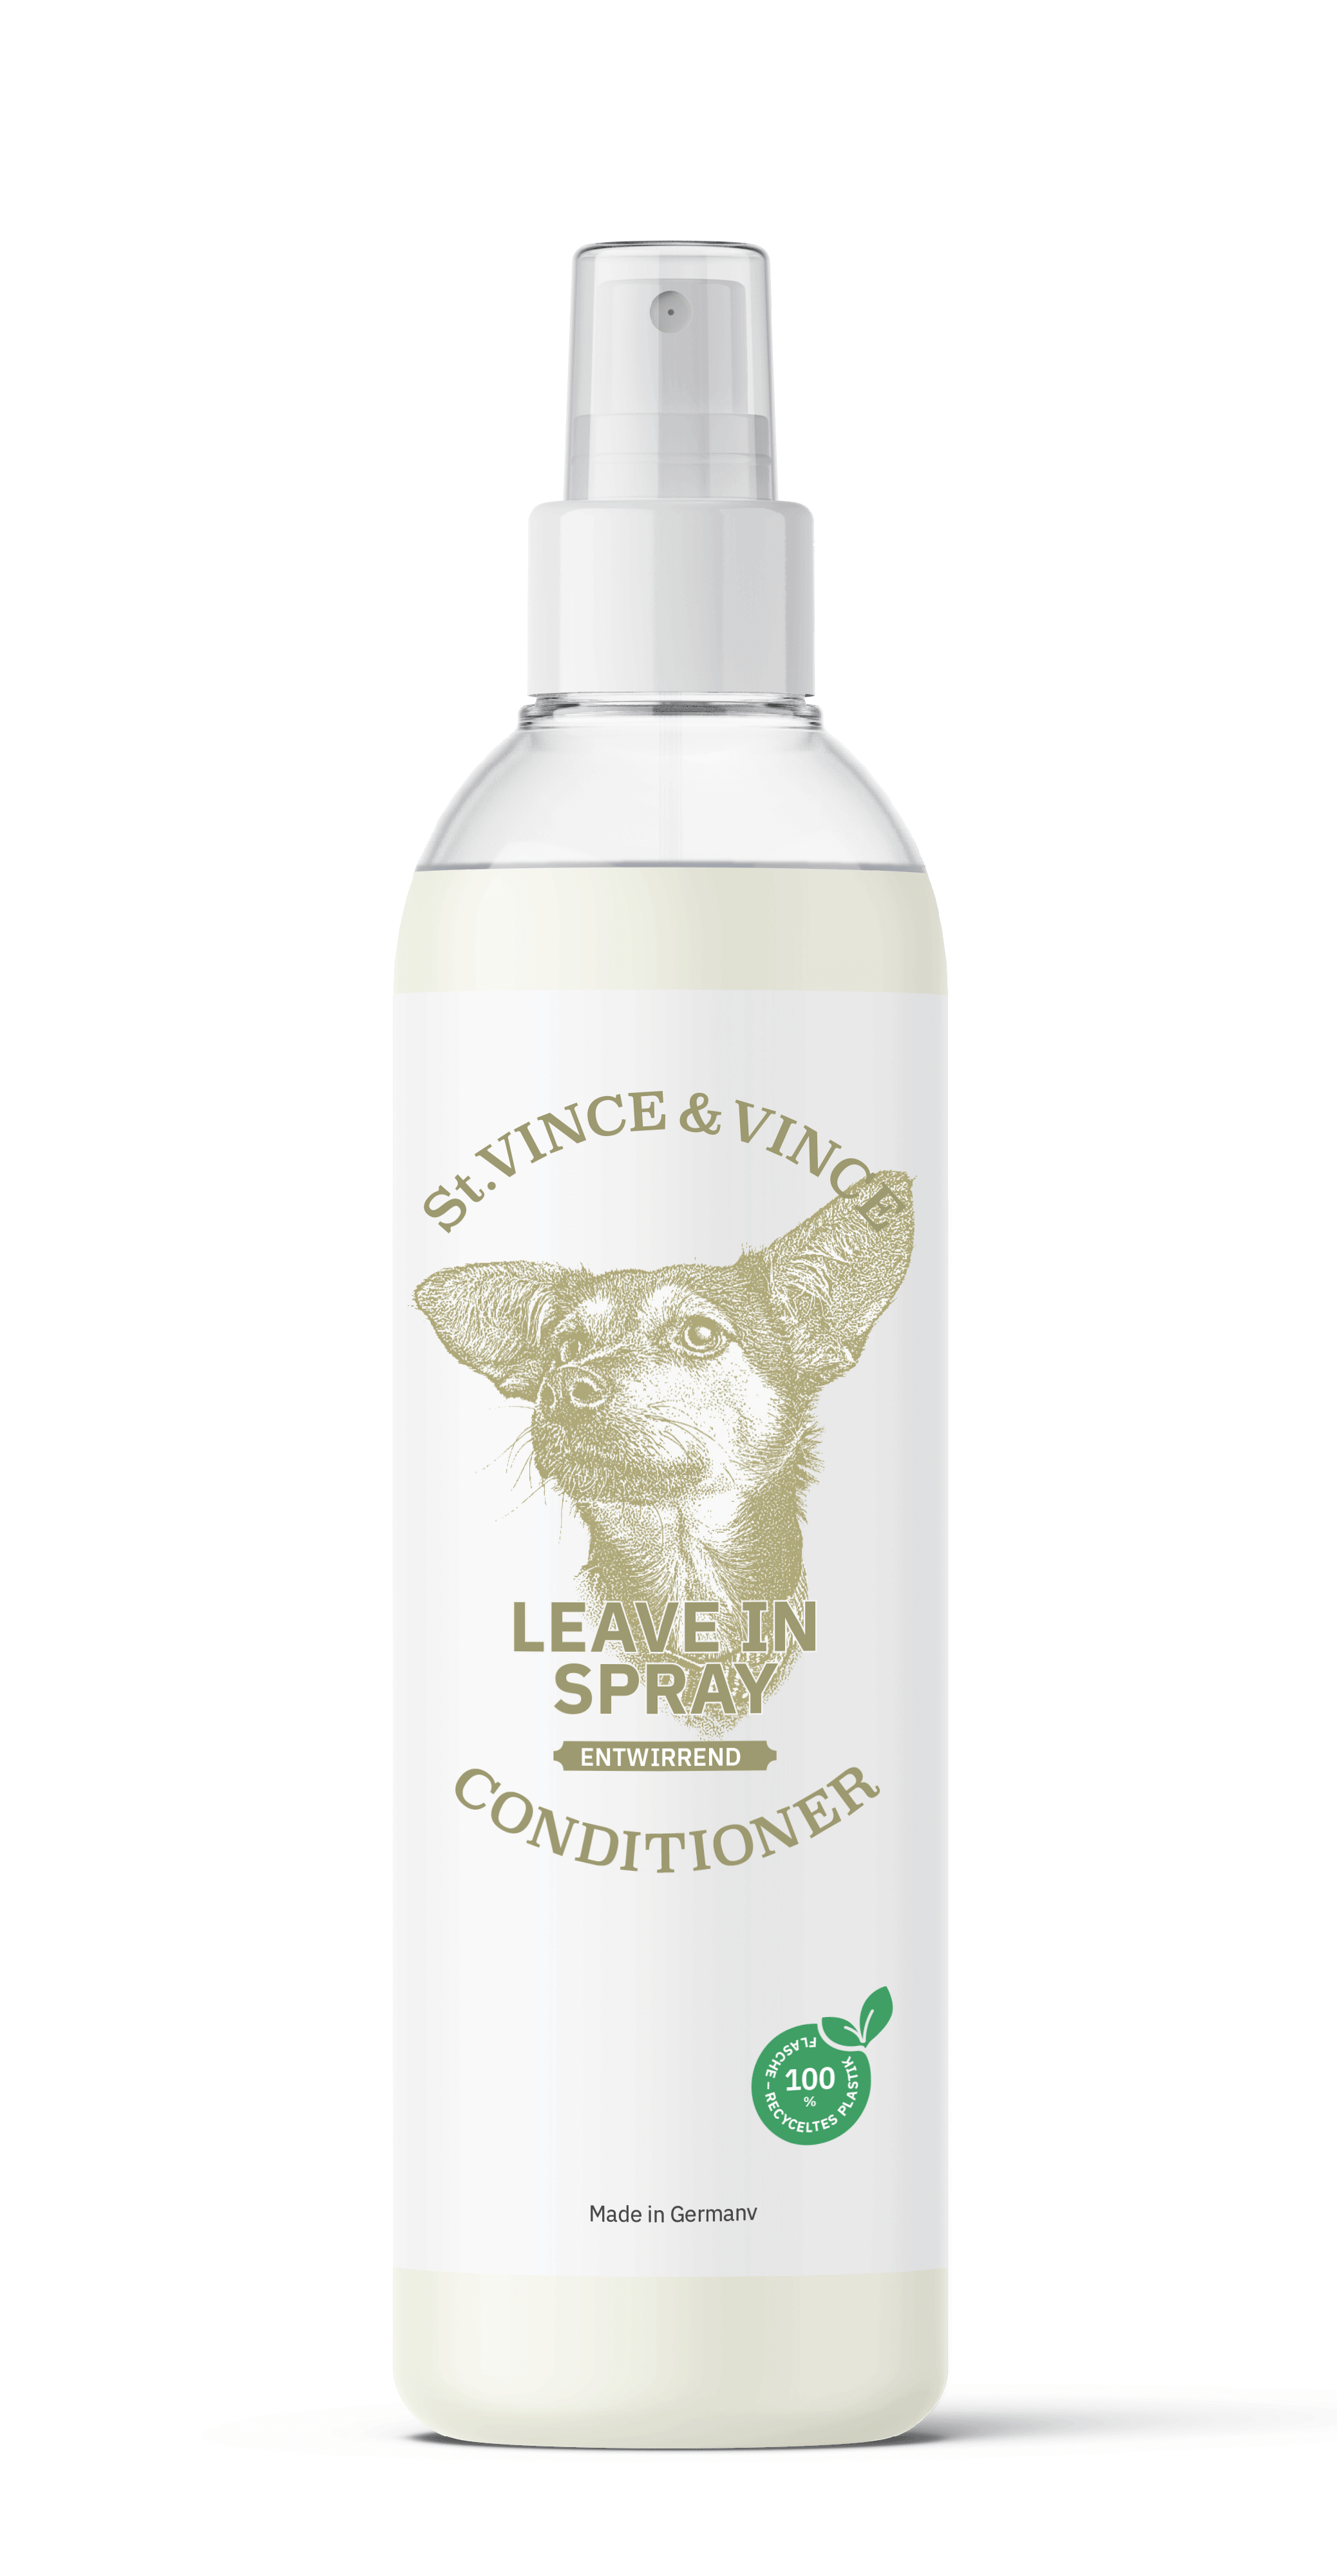 St.Vince Good Conditioner: Leave in Spray